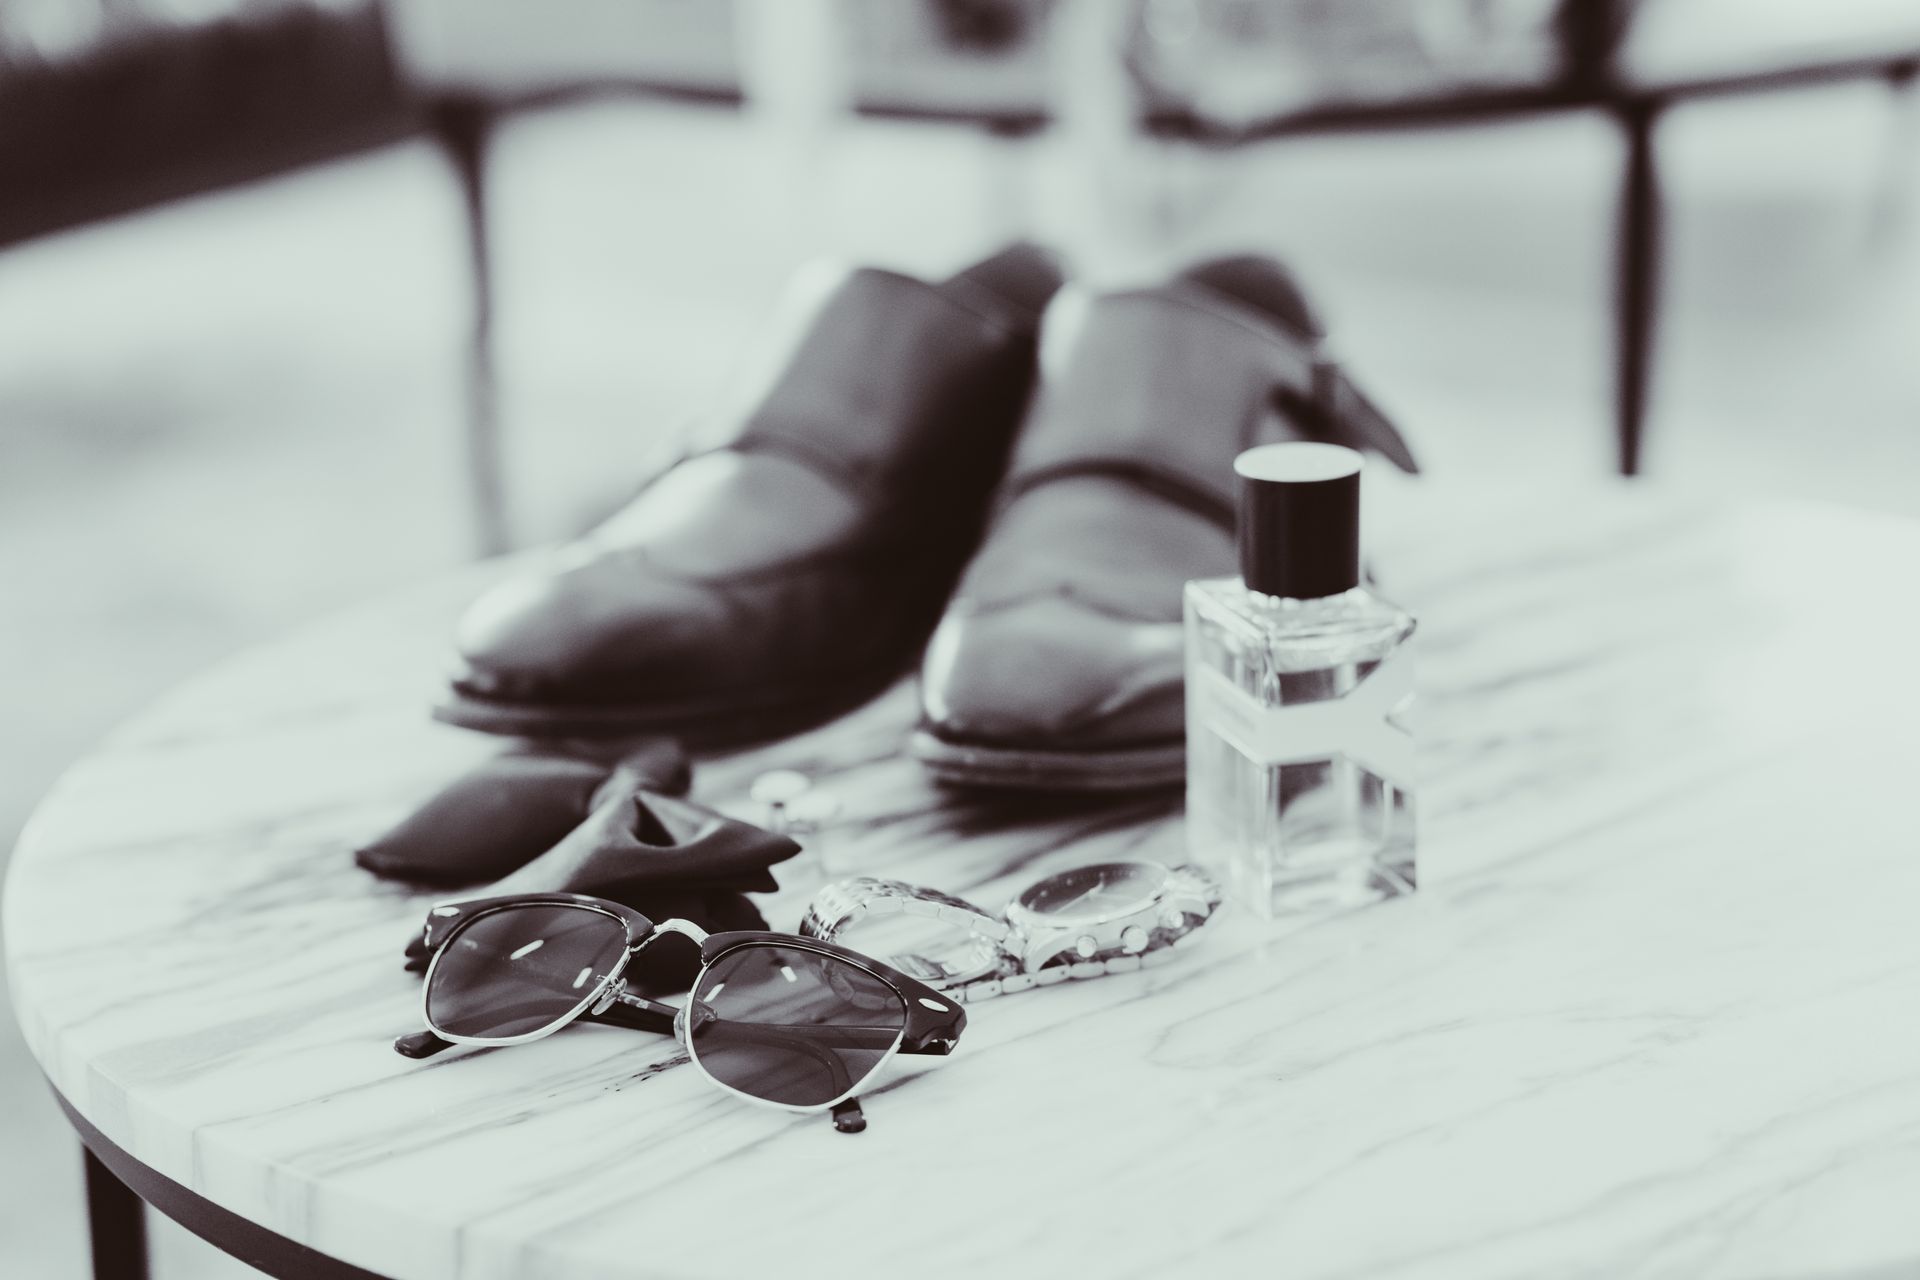 A pair of shoes , sunglasses , and a bottle of perfume are on a table.